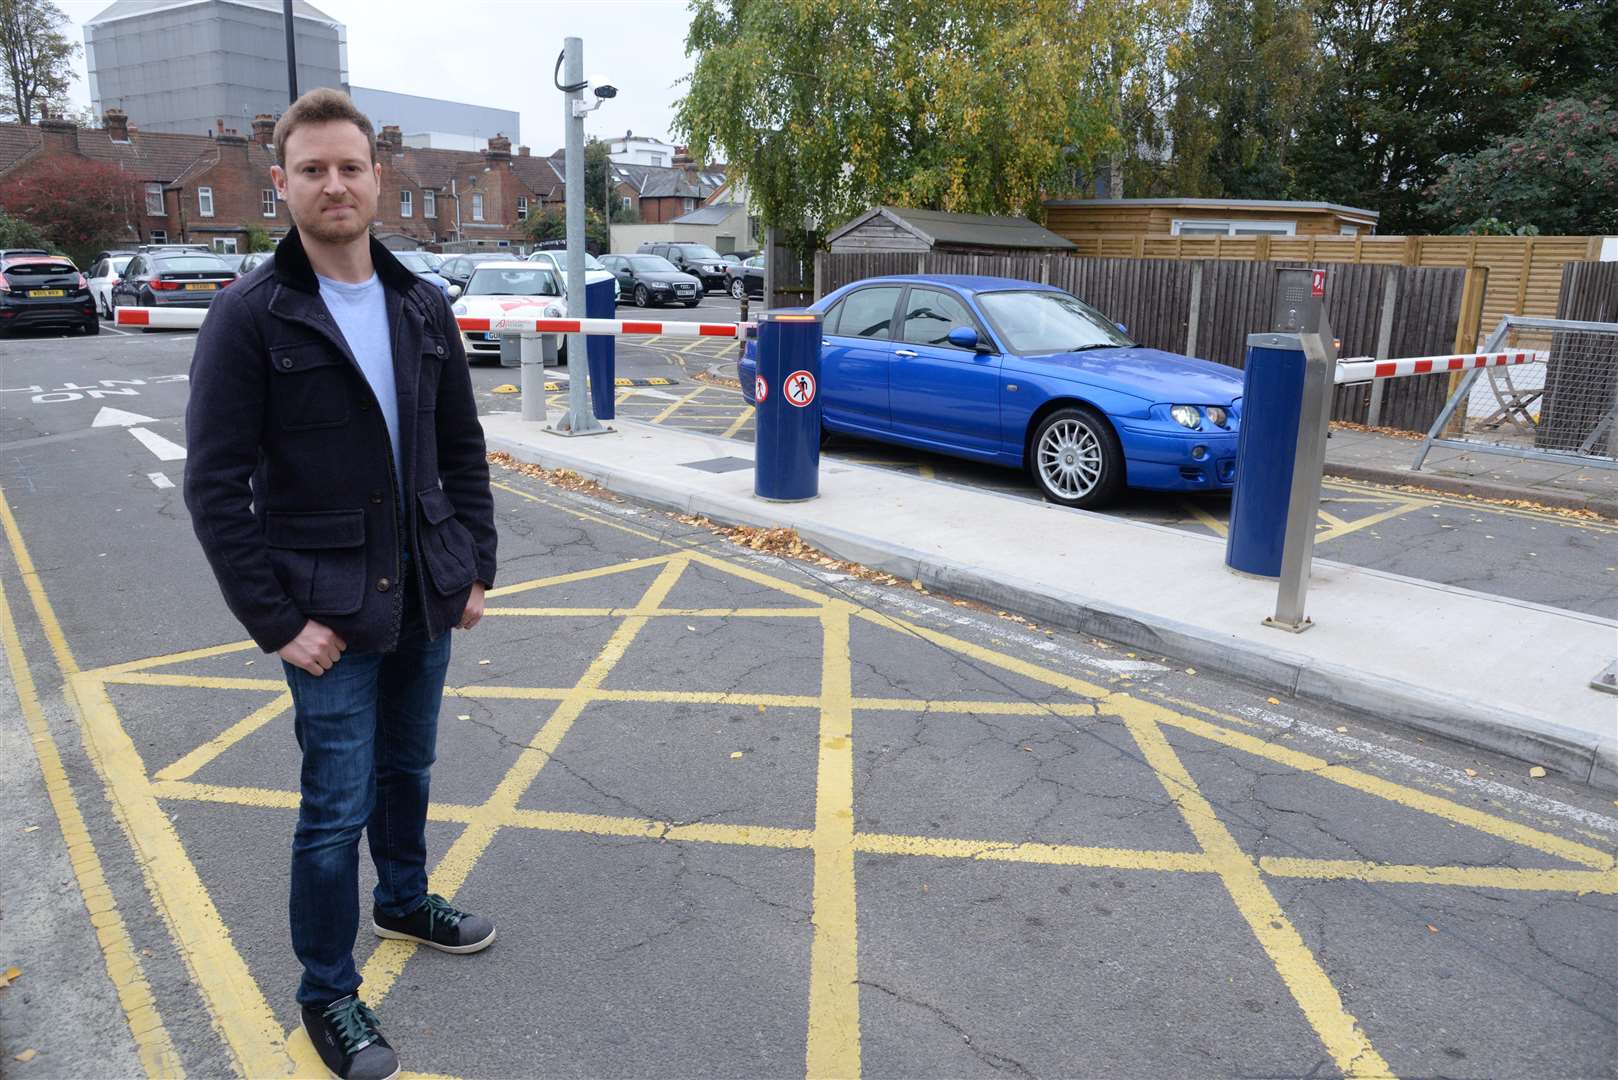 Cllr Ben-Fitter Harding and the ANPR barriers at the Pound Lane car park. Picture: Chris Davey